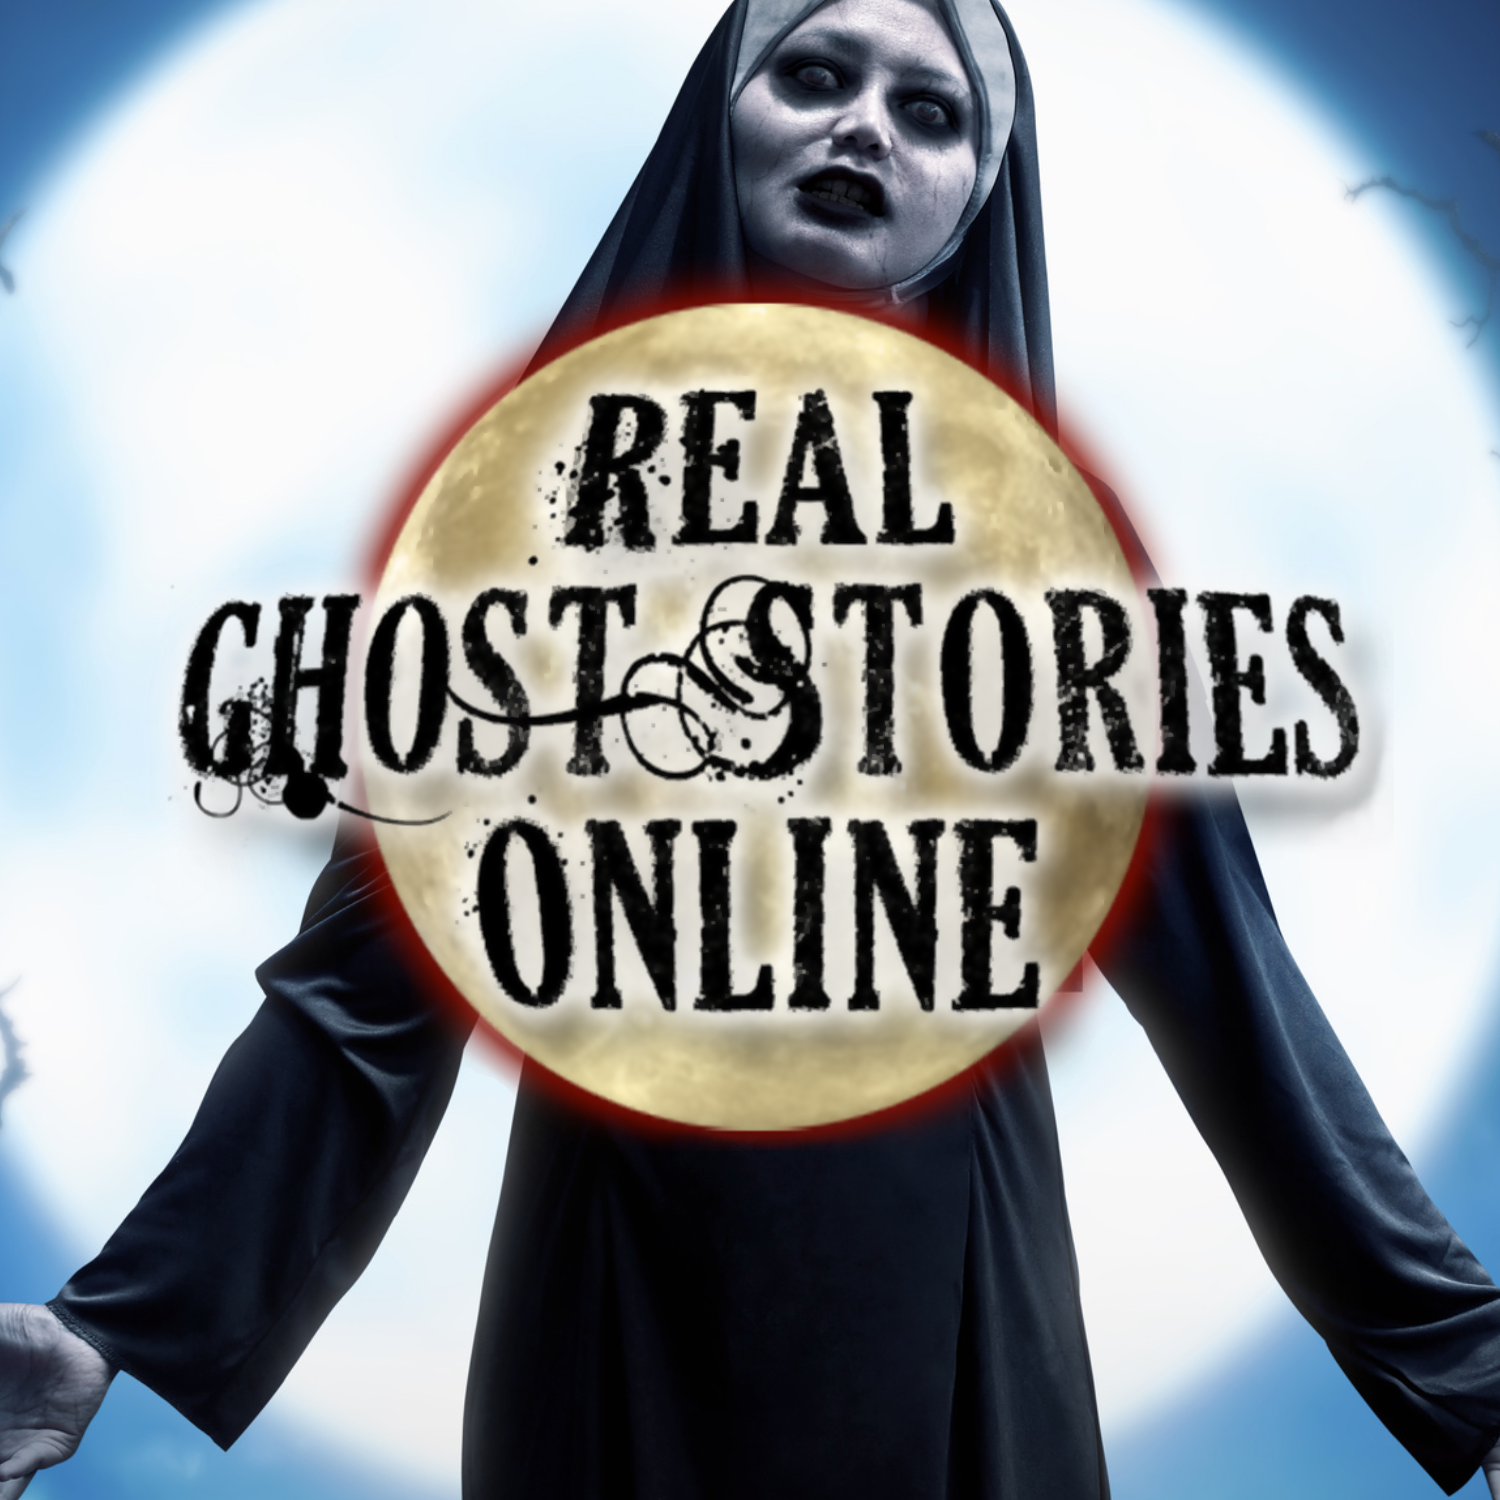 Home For the Holidays | #TrueGhostStory #GhostStories #HorrorPodcast